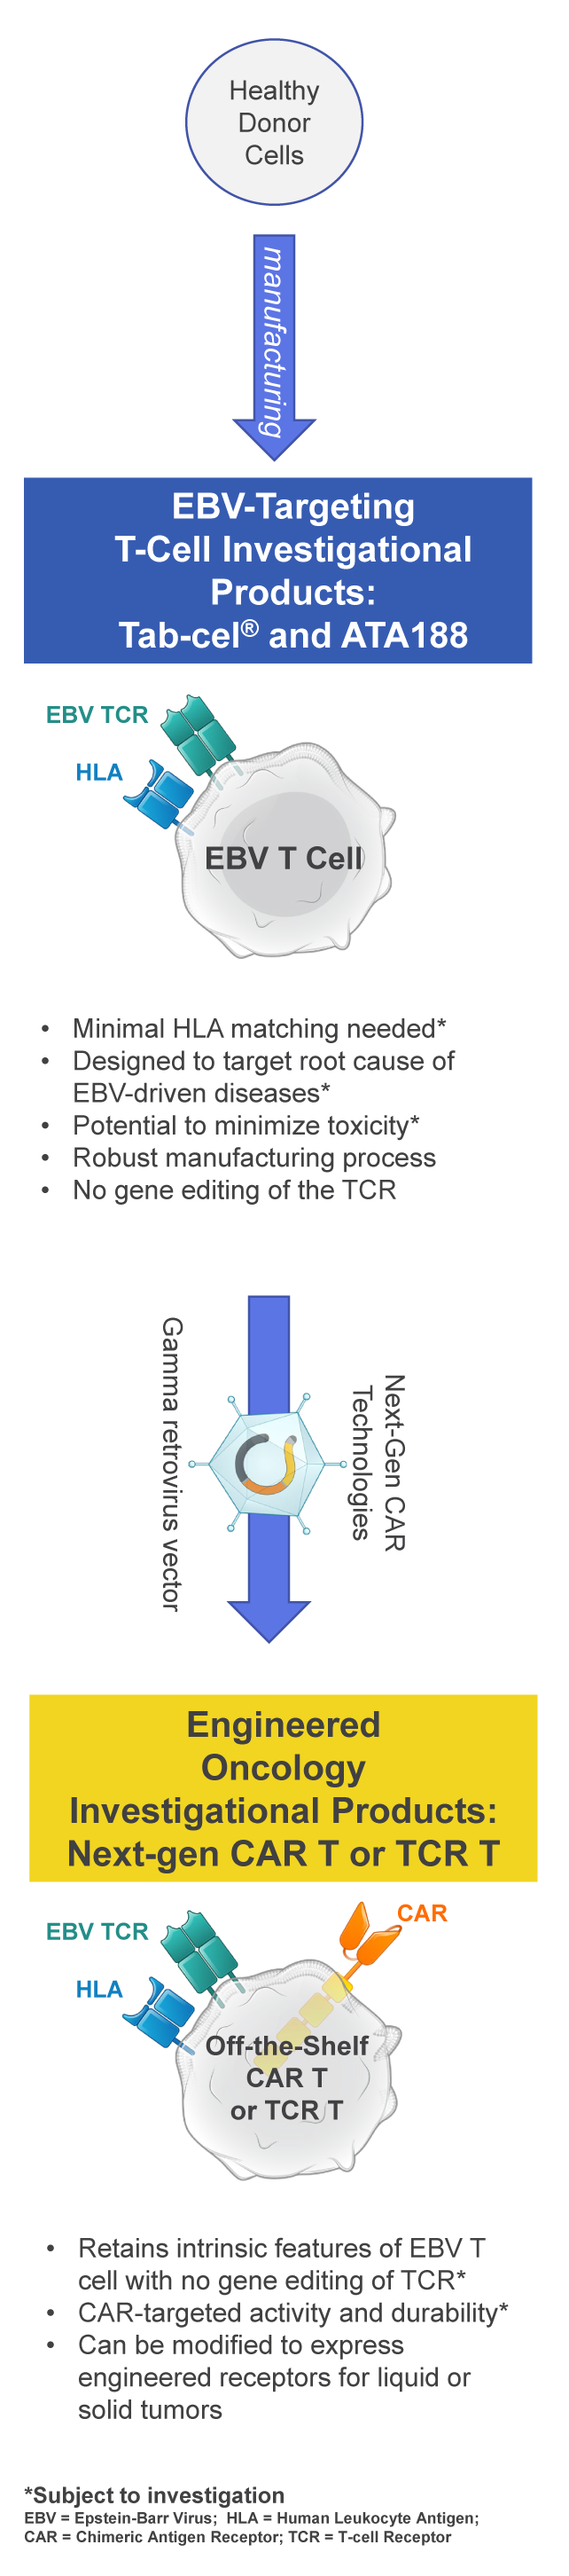 Atara: A Differentiated Approach to Allogeneic Cell Therapy, with No Gene Editing of the T-Cell Receptor